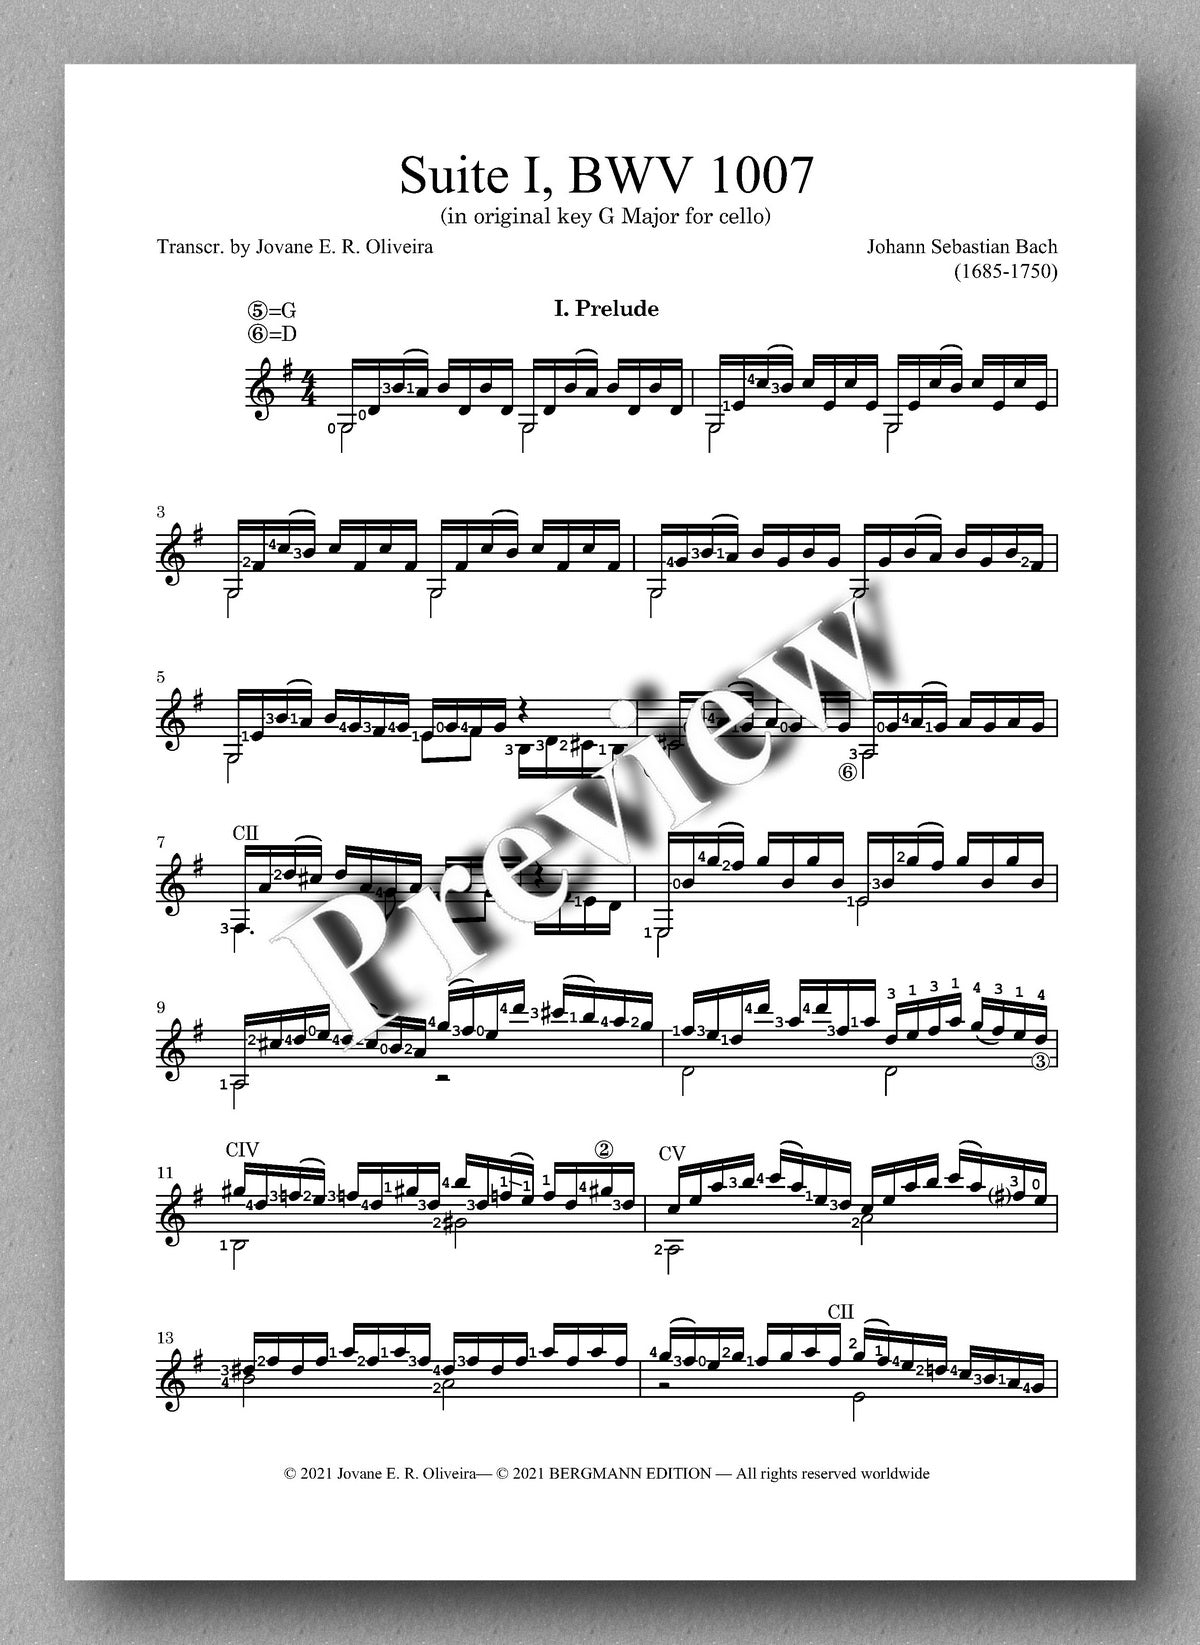 Bach-Oliveira, Cello Suite No 1, BWV 1007 - 6 strings - music score 1